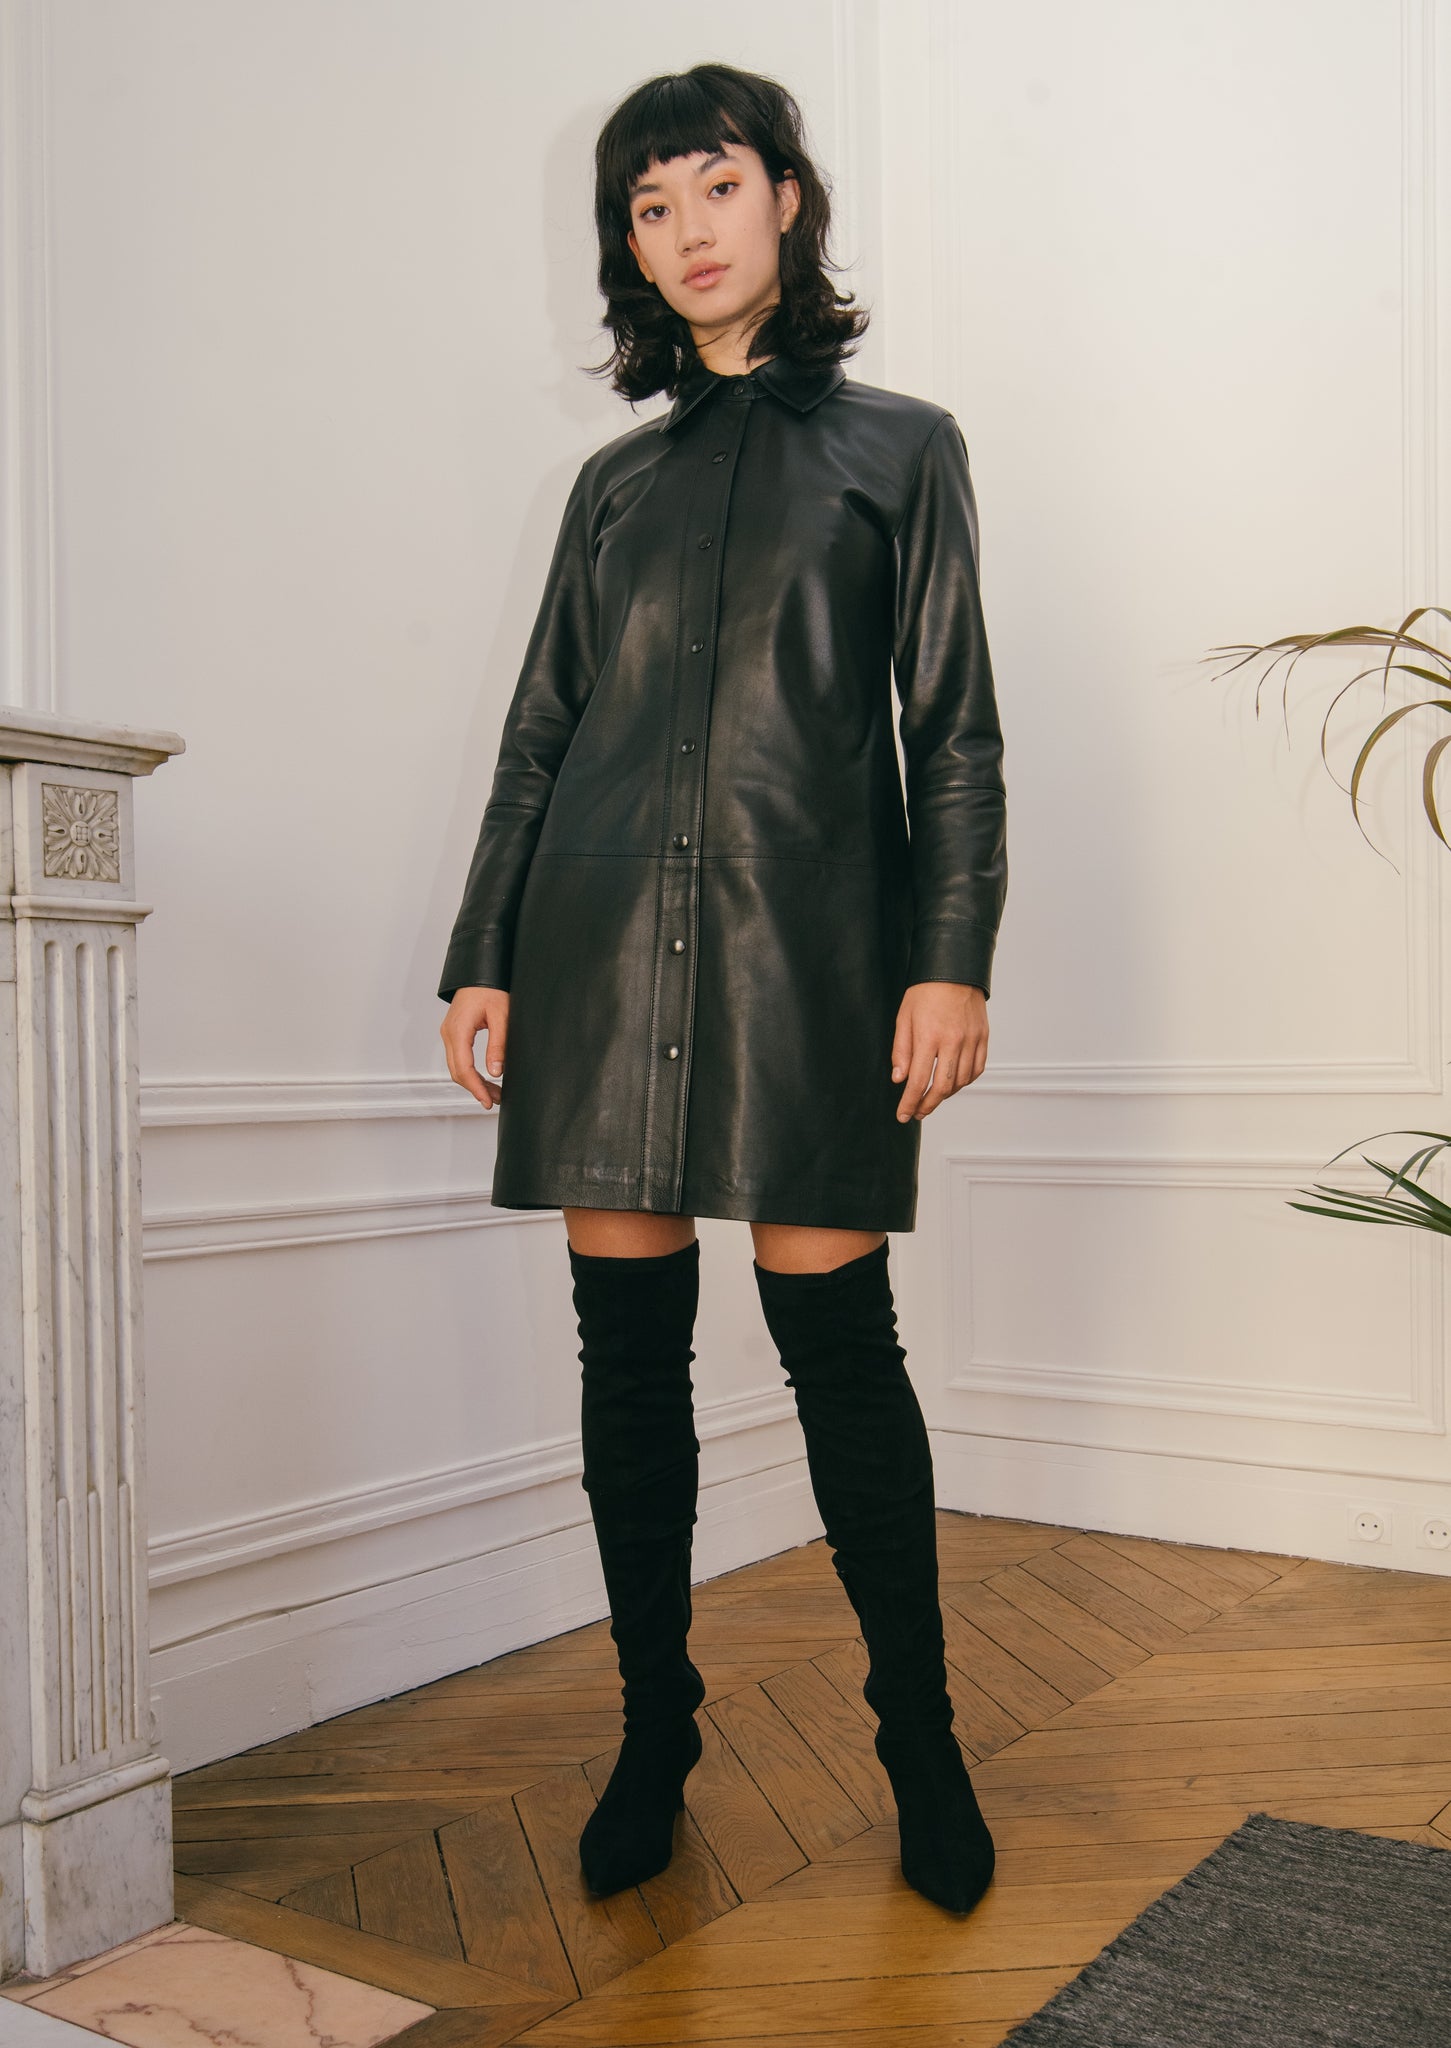 The leather shirt dress